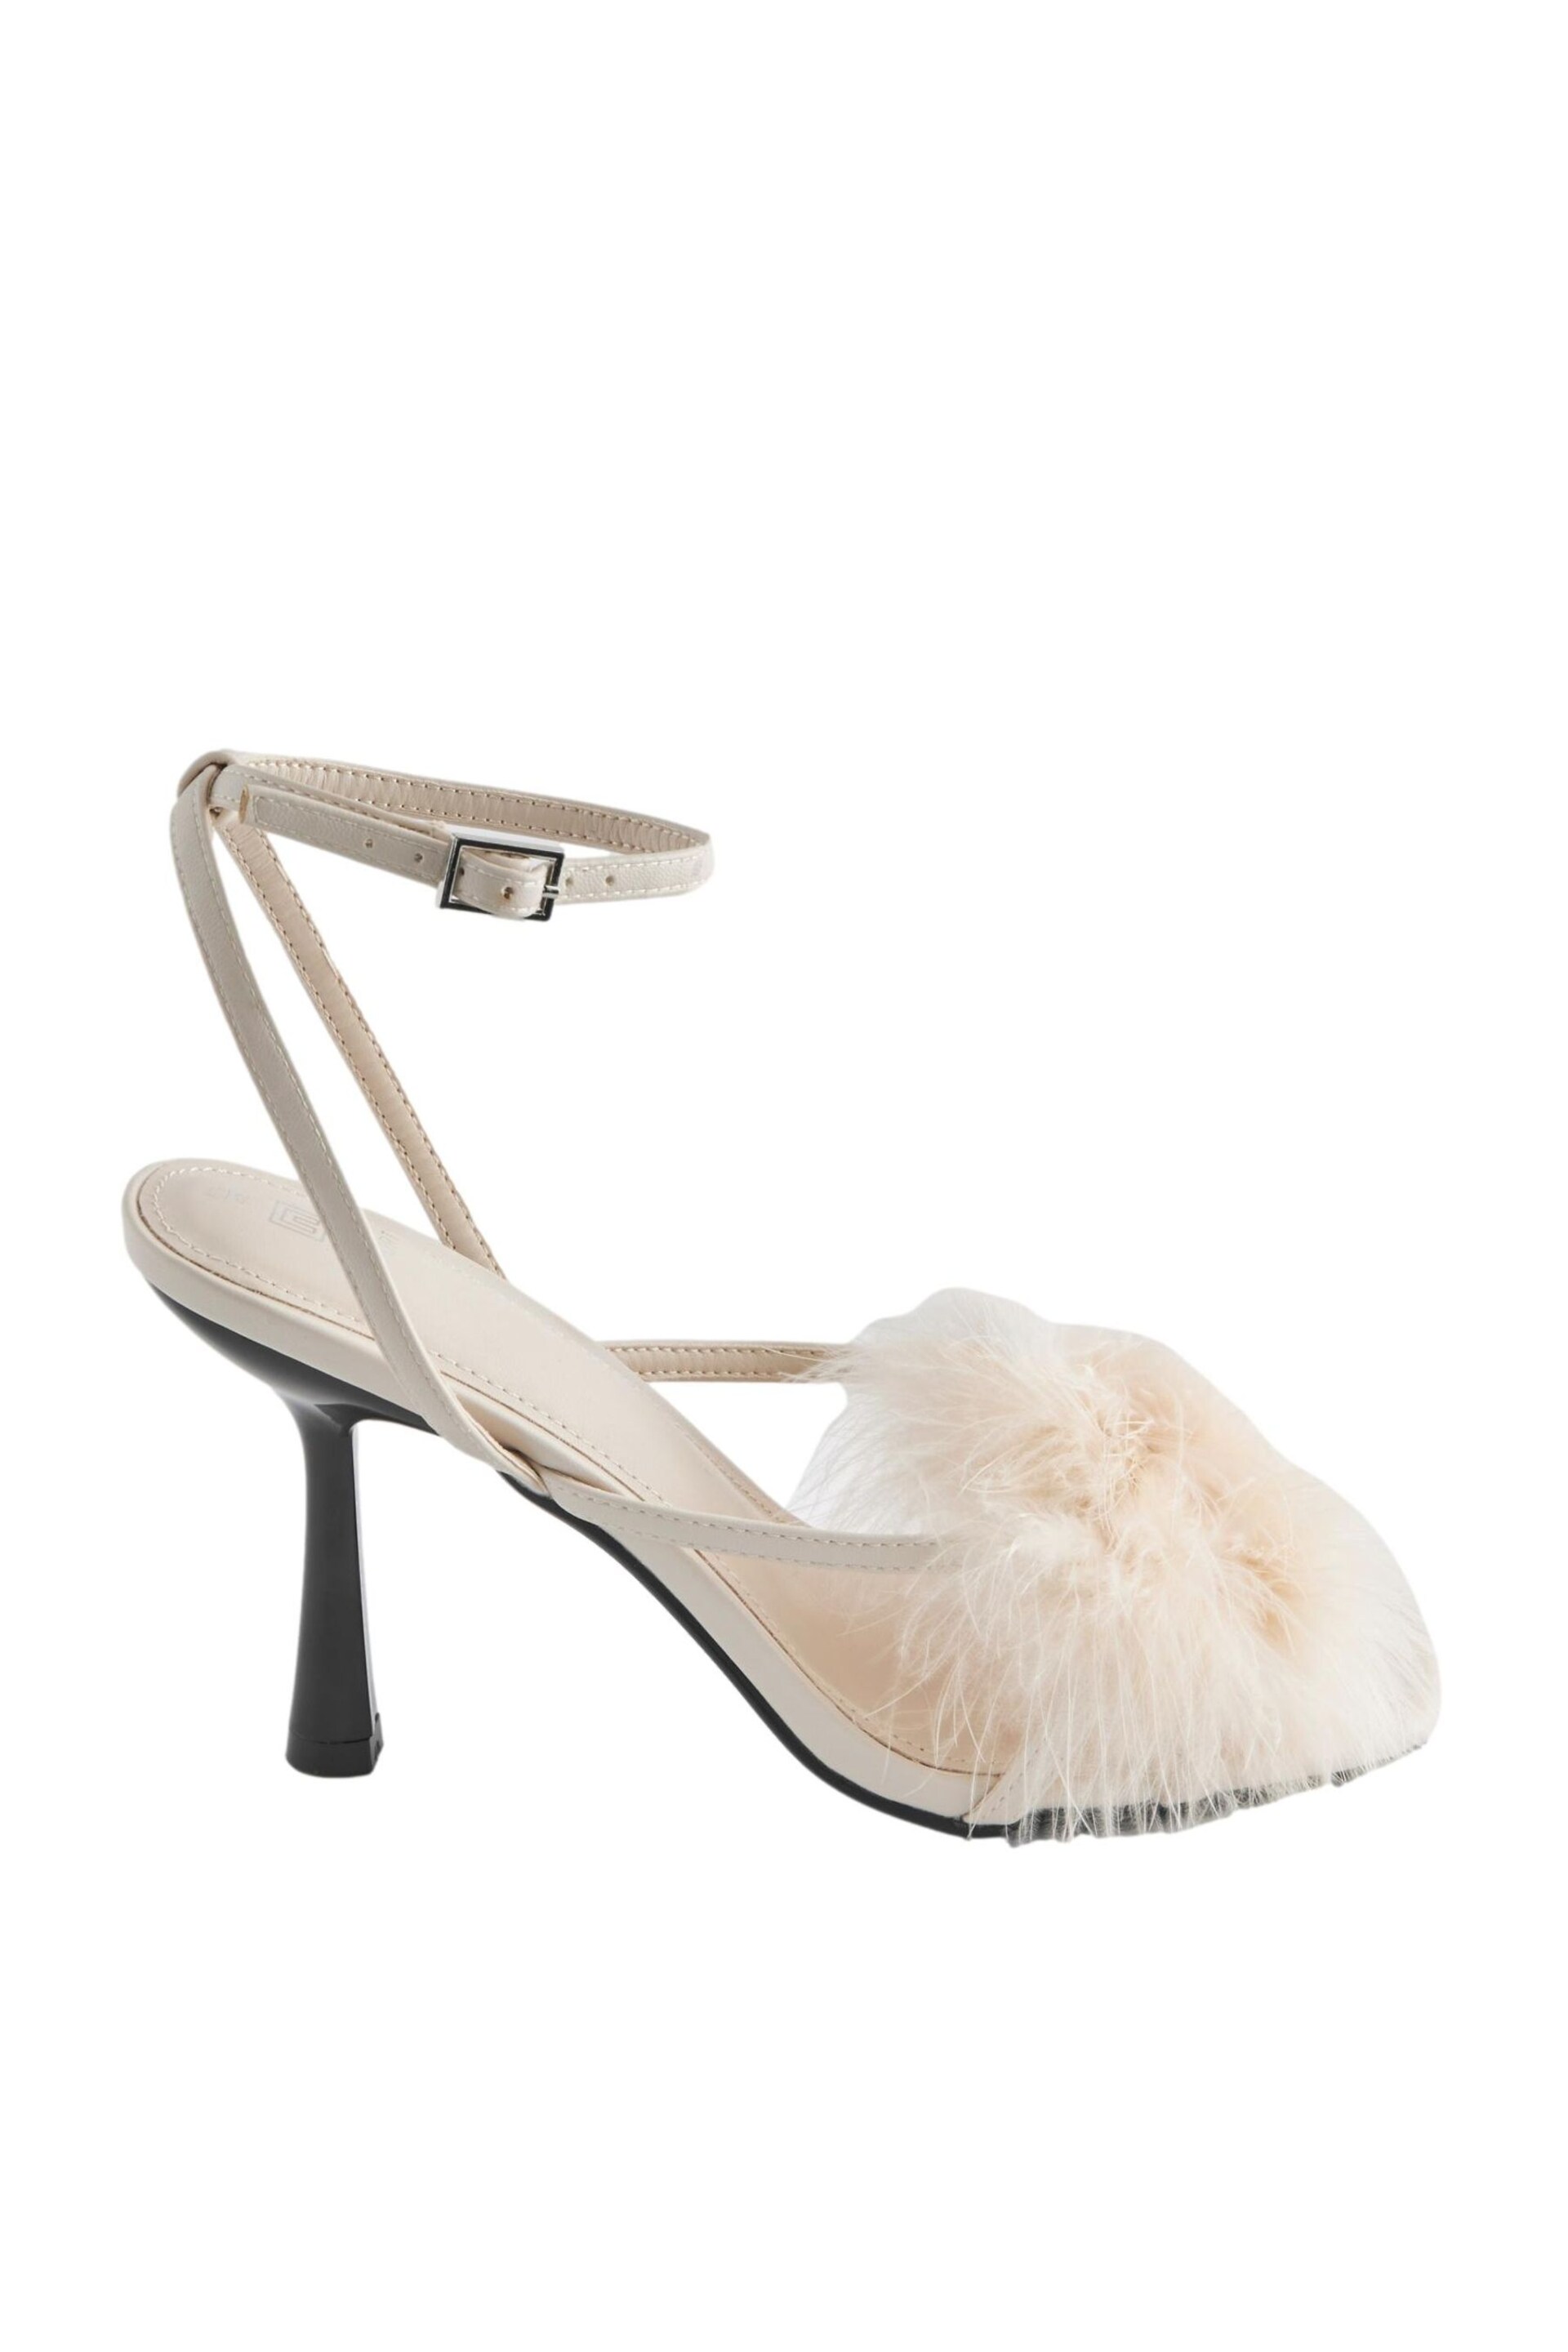 Bone White Forever Comfort® Real Feather Heel Sandals - Image 2 of 5